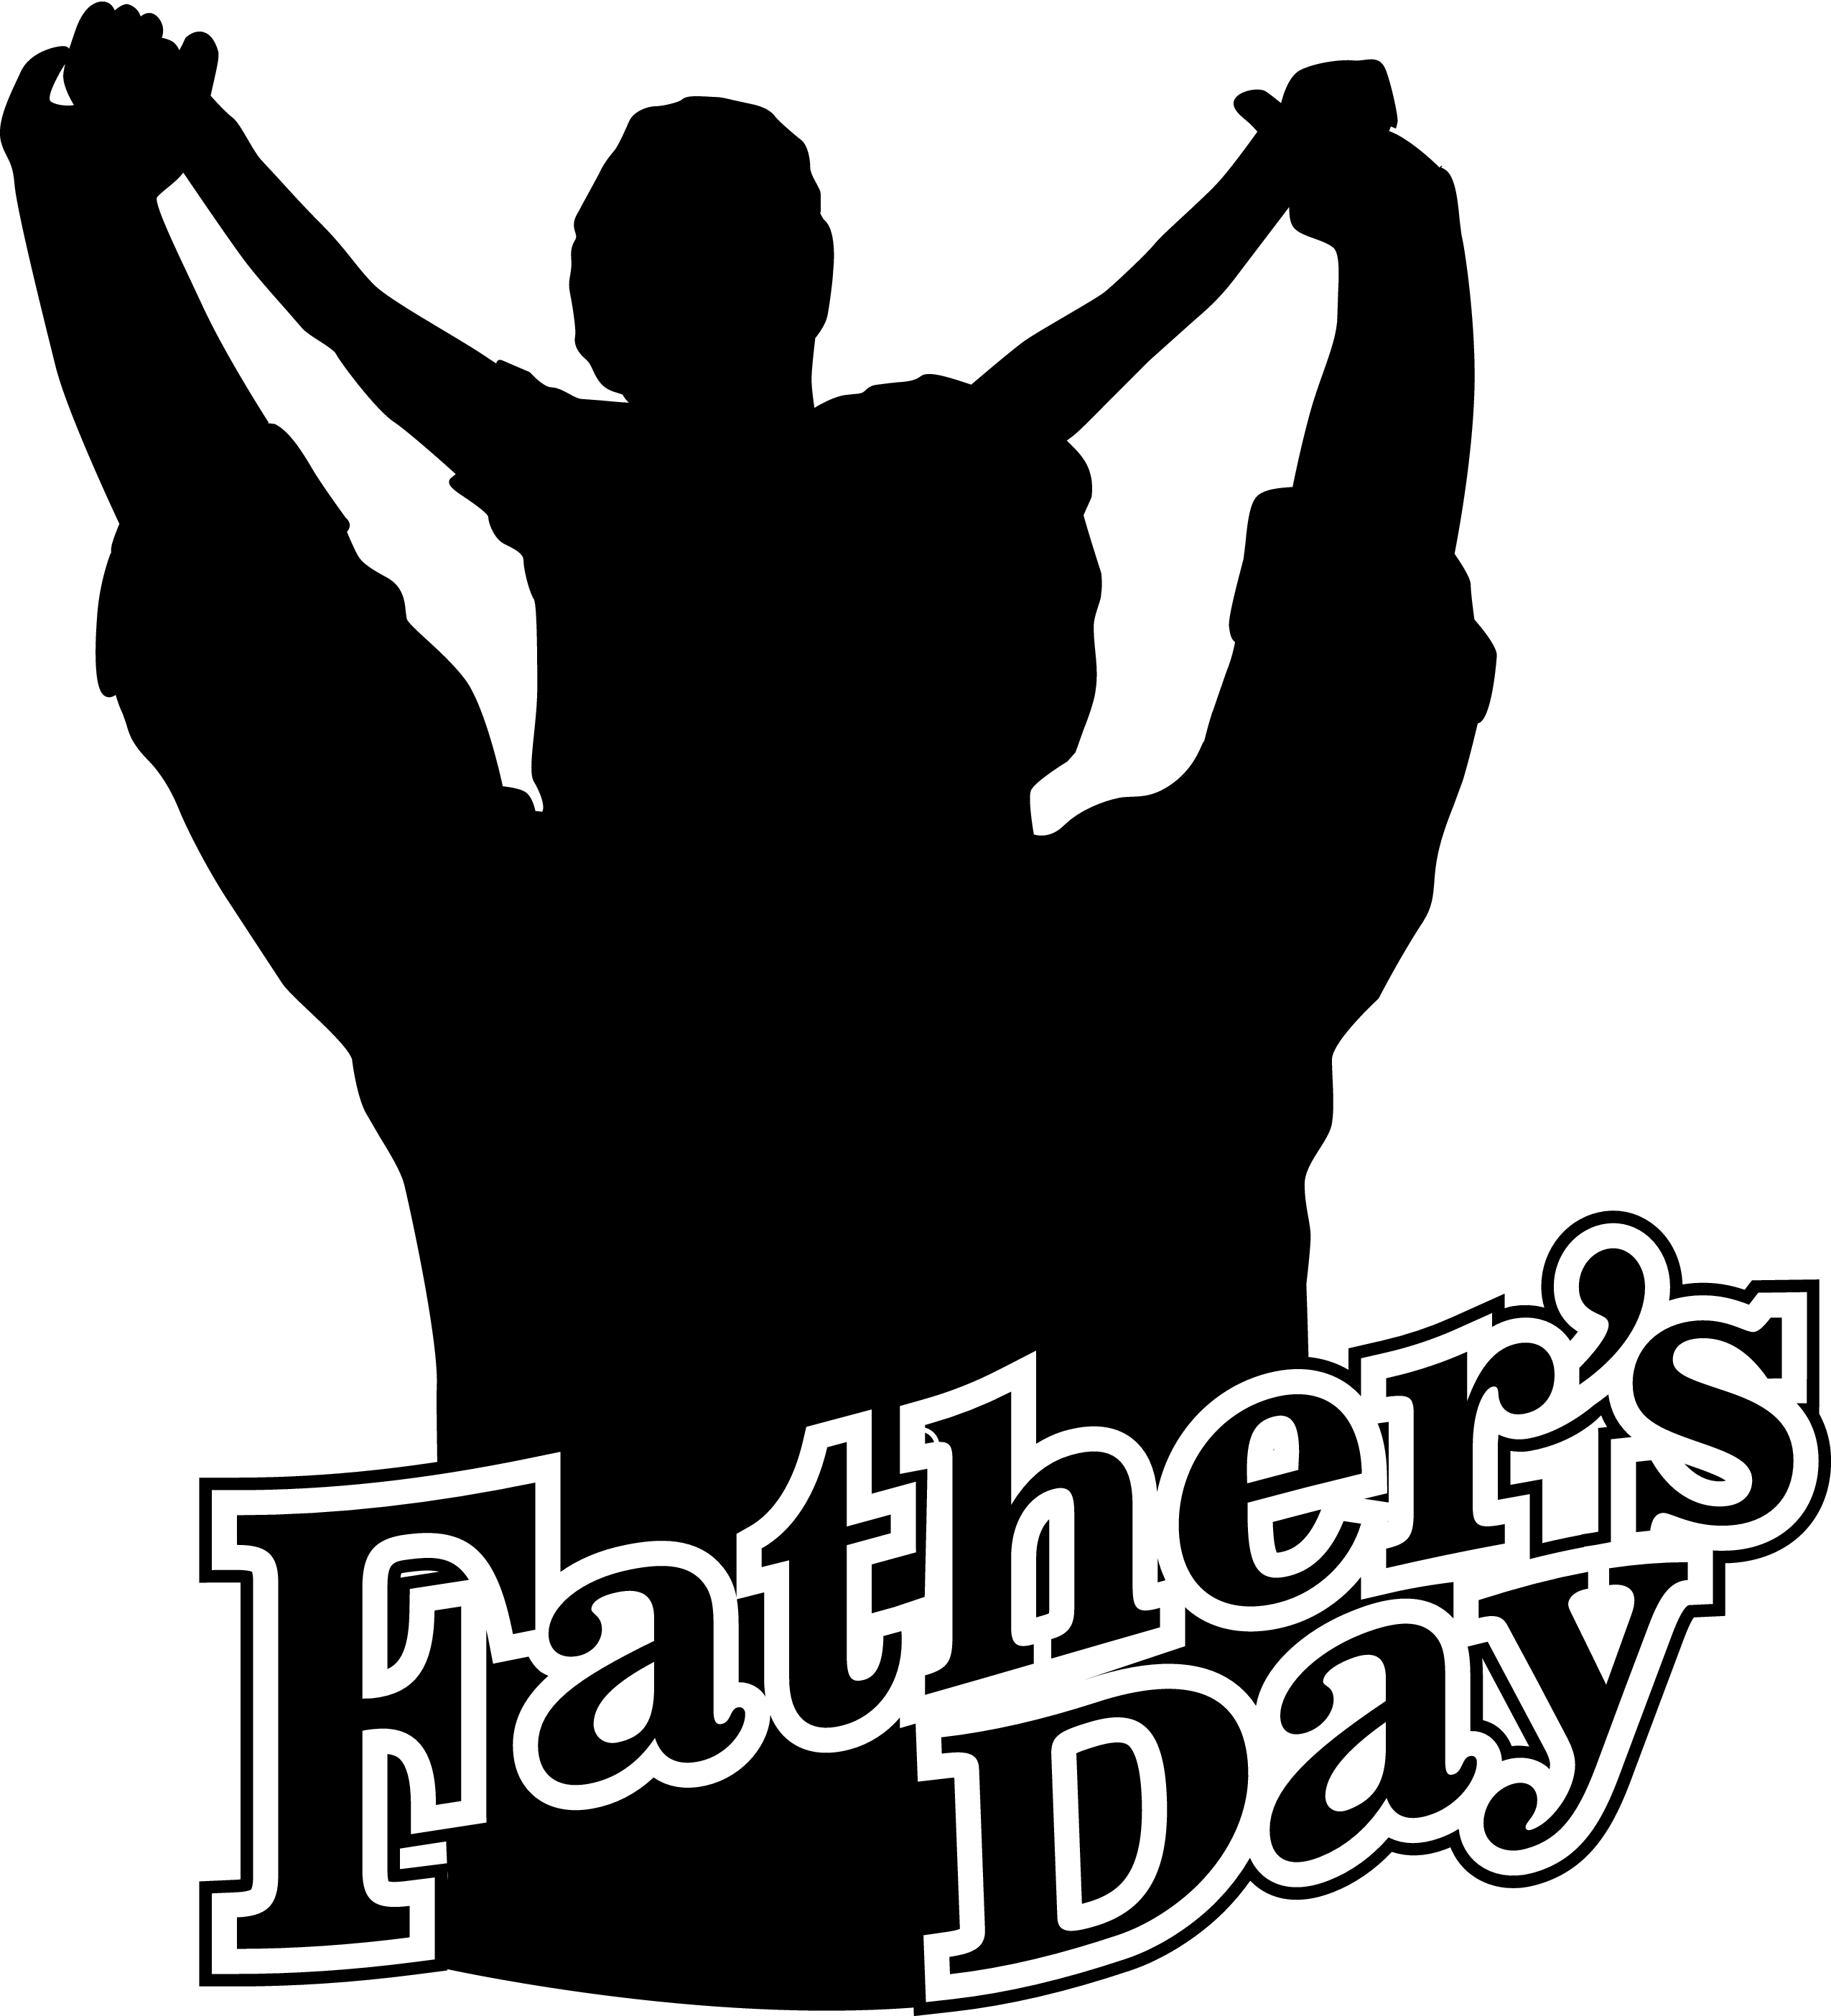 Free Fathers Day Clipart | Free Download Clip Art | Free Clip Art ...